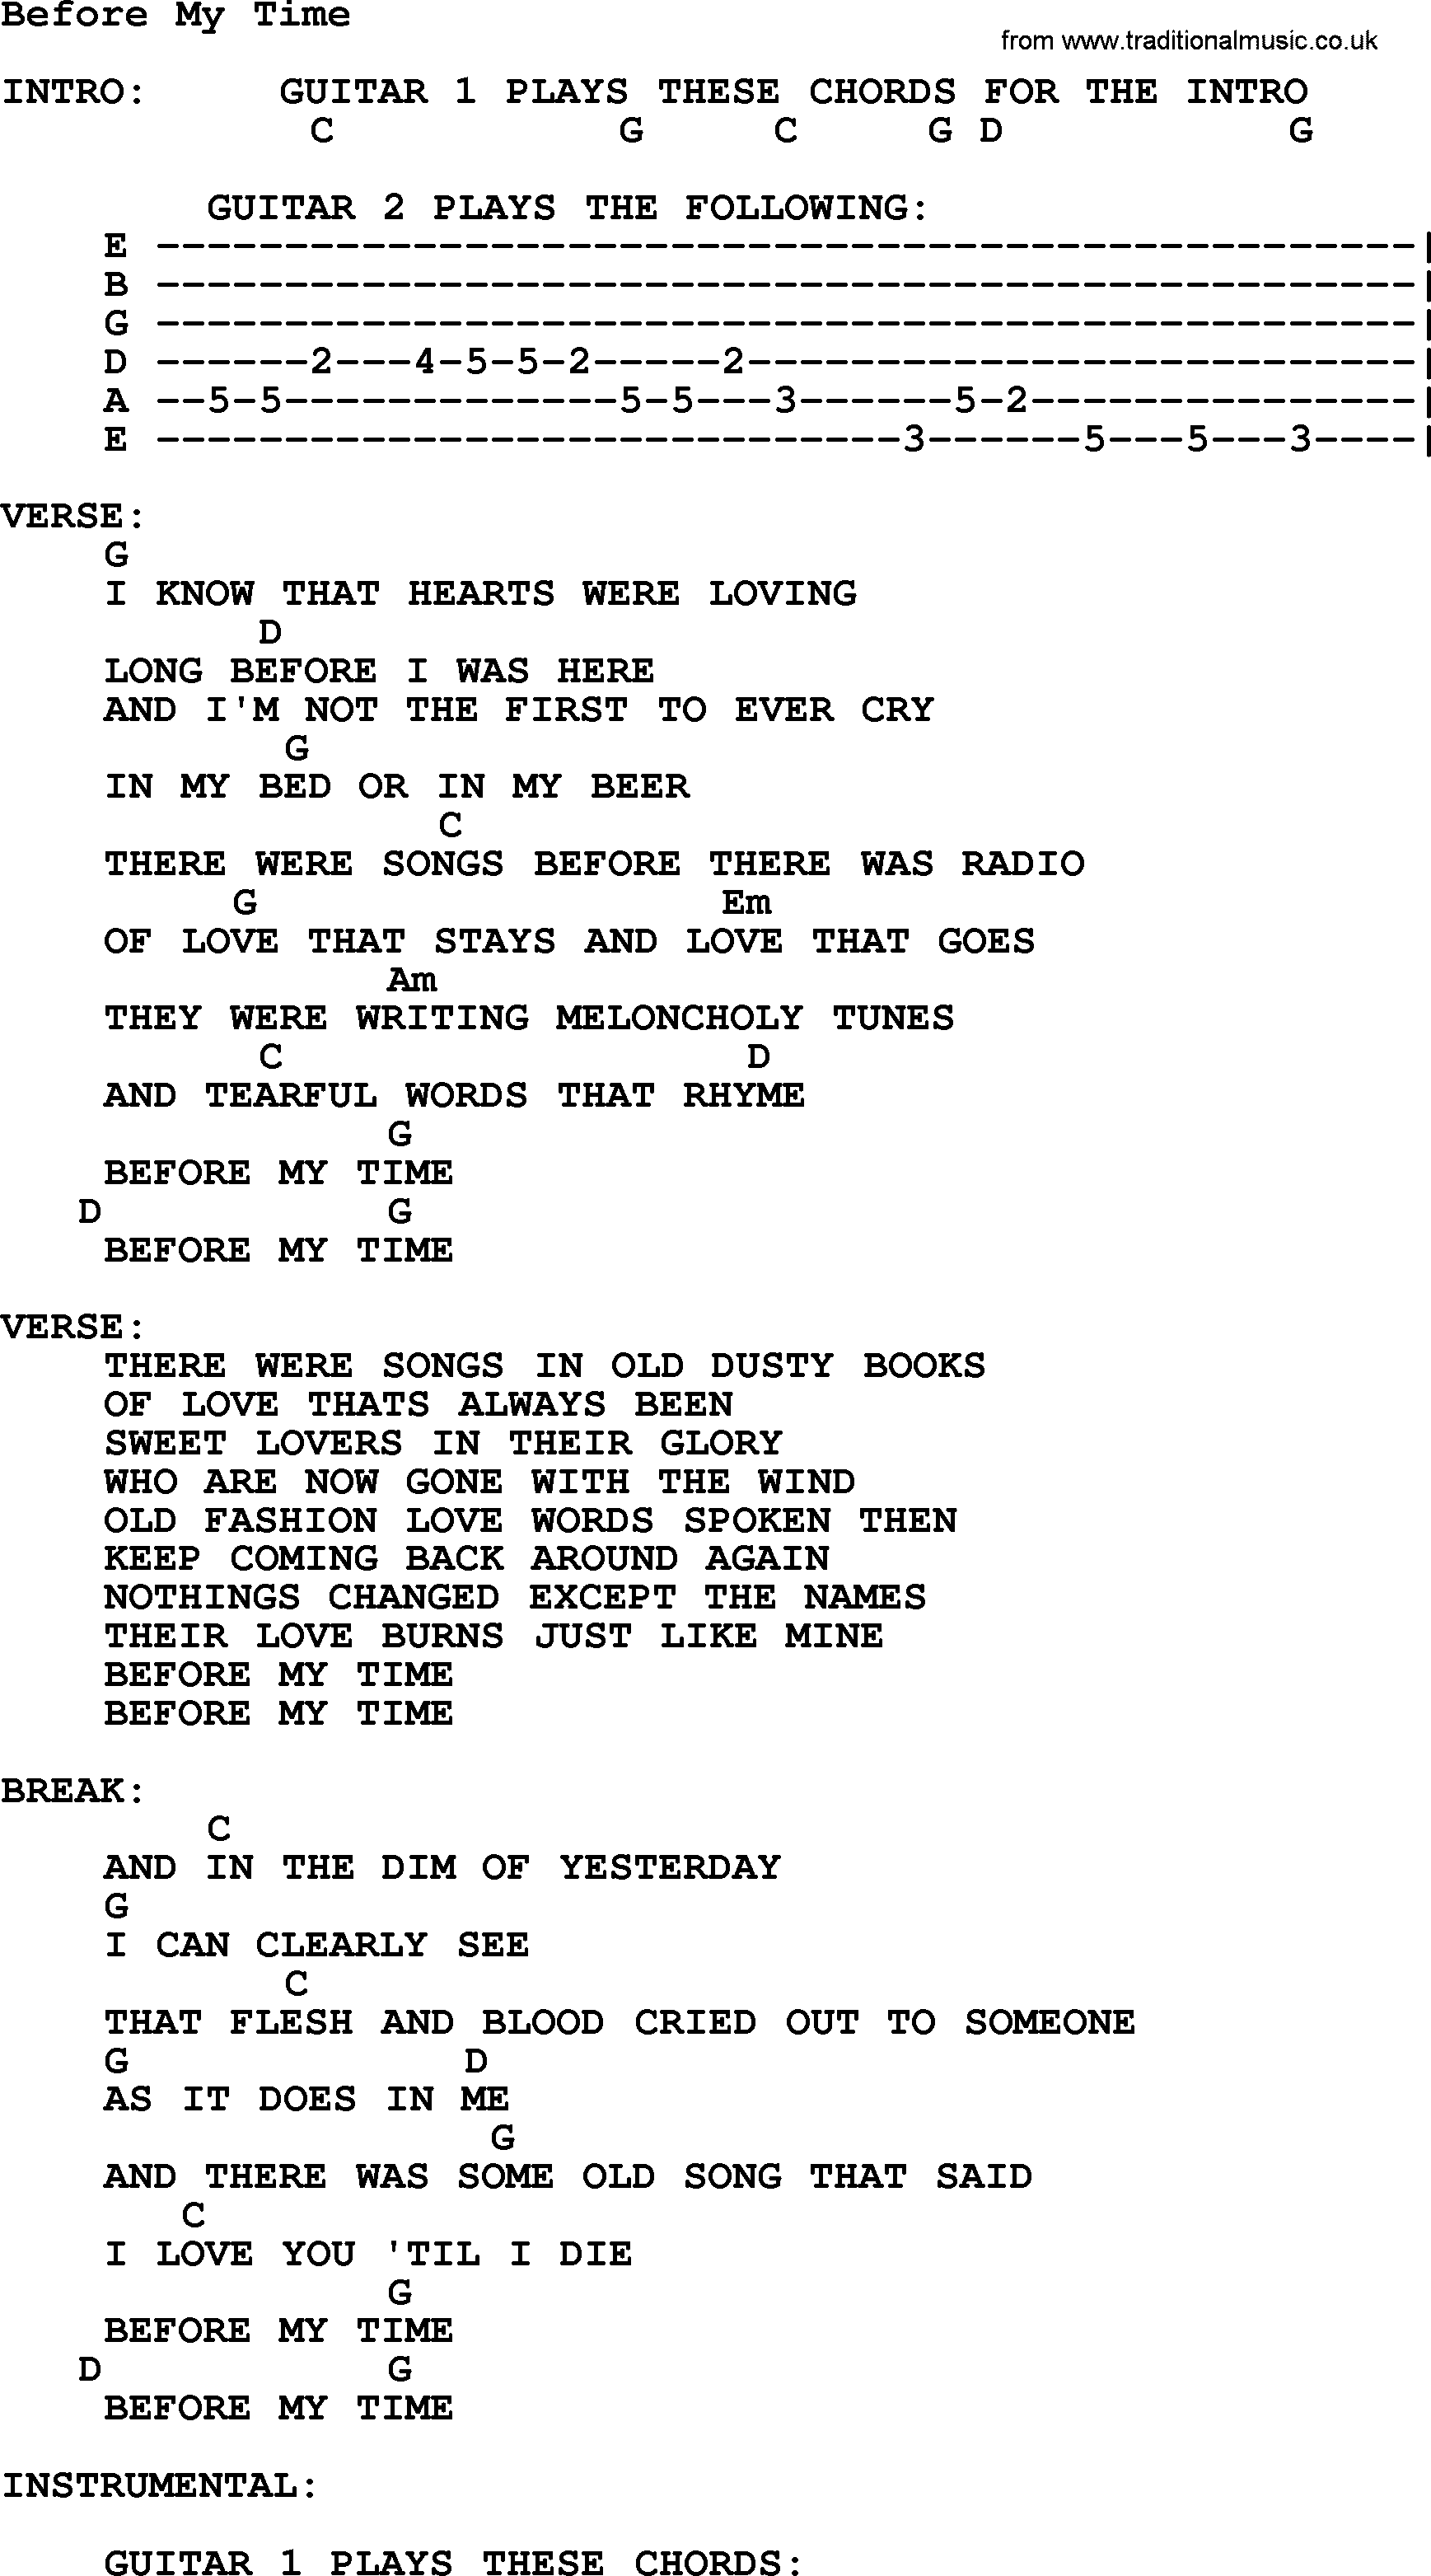 Johnny Cash song Before My Time, lyrics and chords